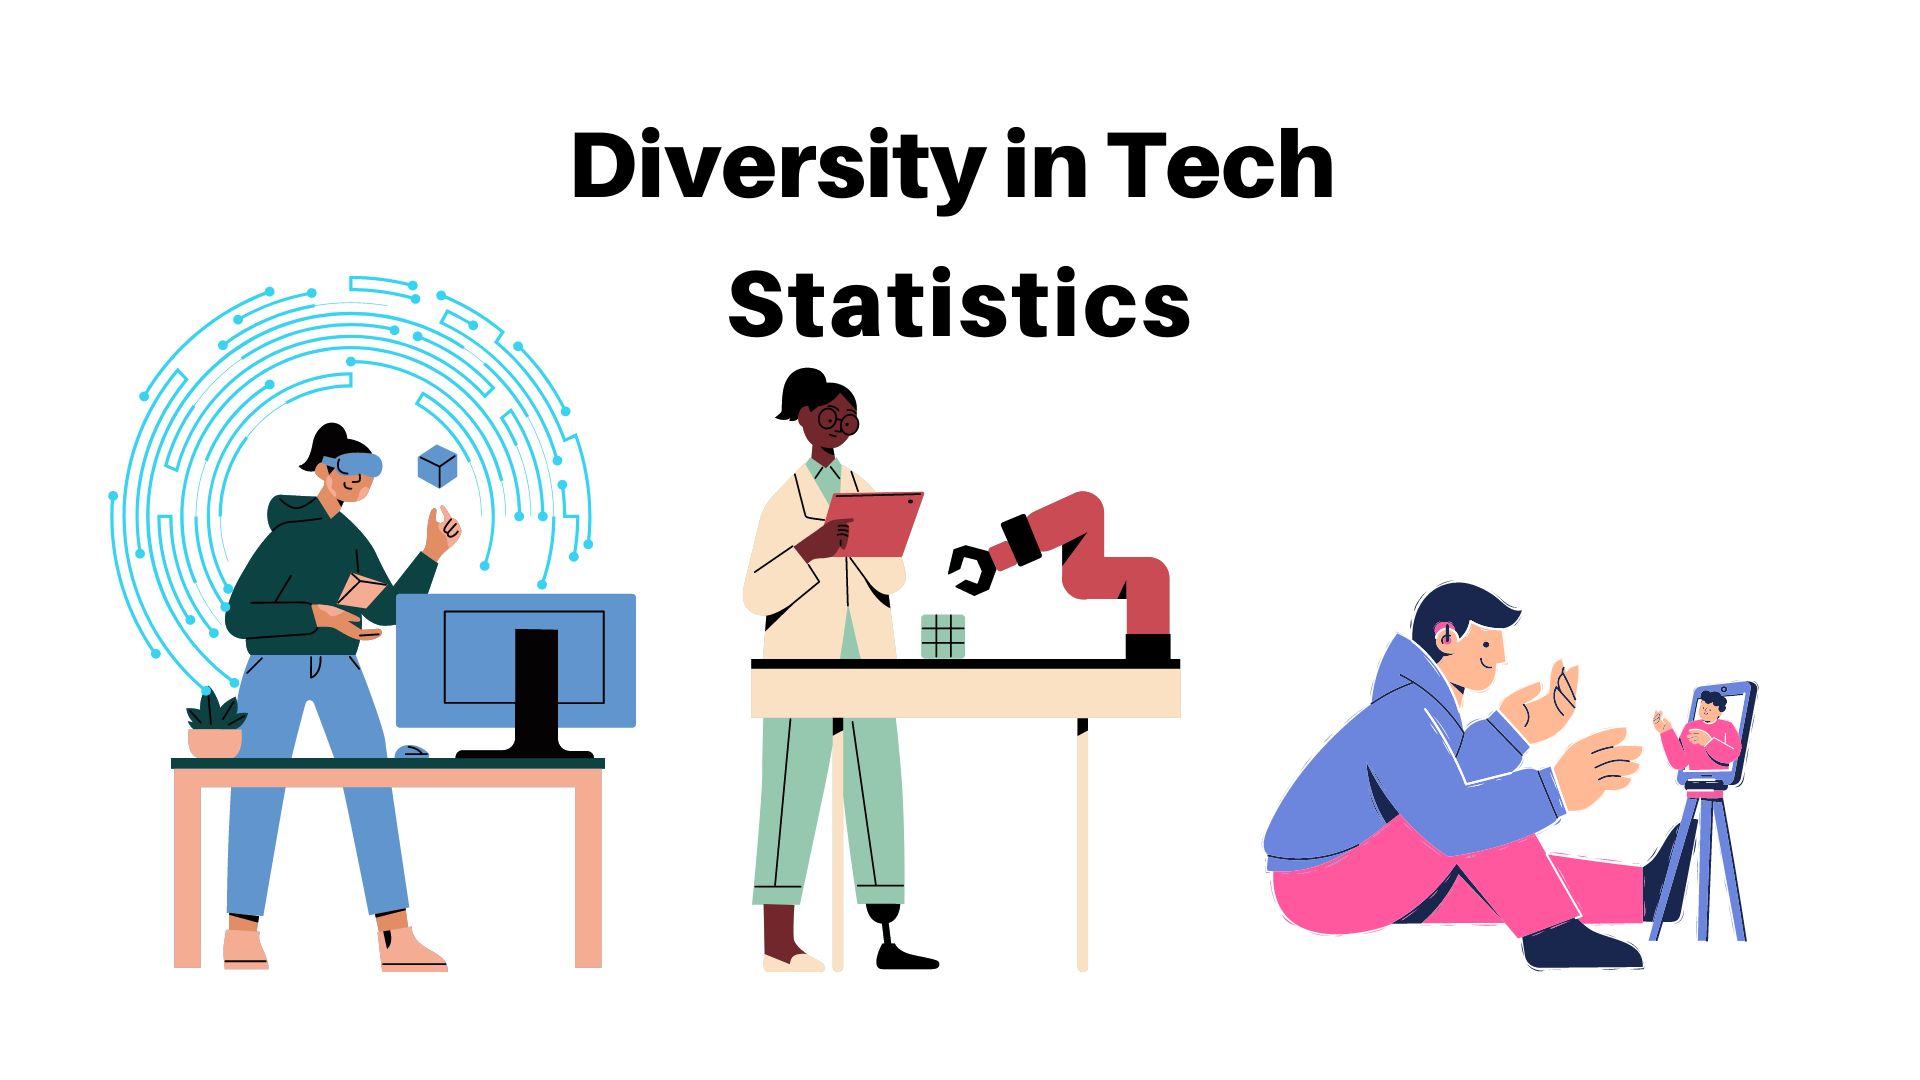 Diversity in Tech Statistics By Countries, Companies and Demographic (Age, Gender, Race, Education)